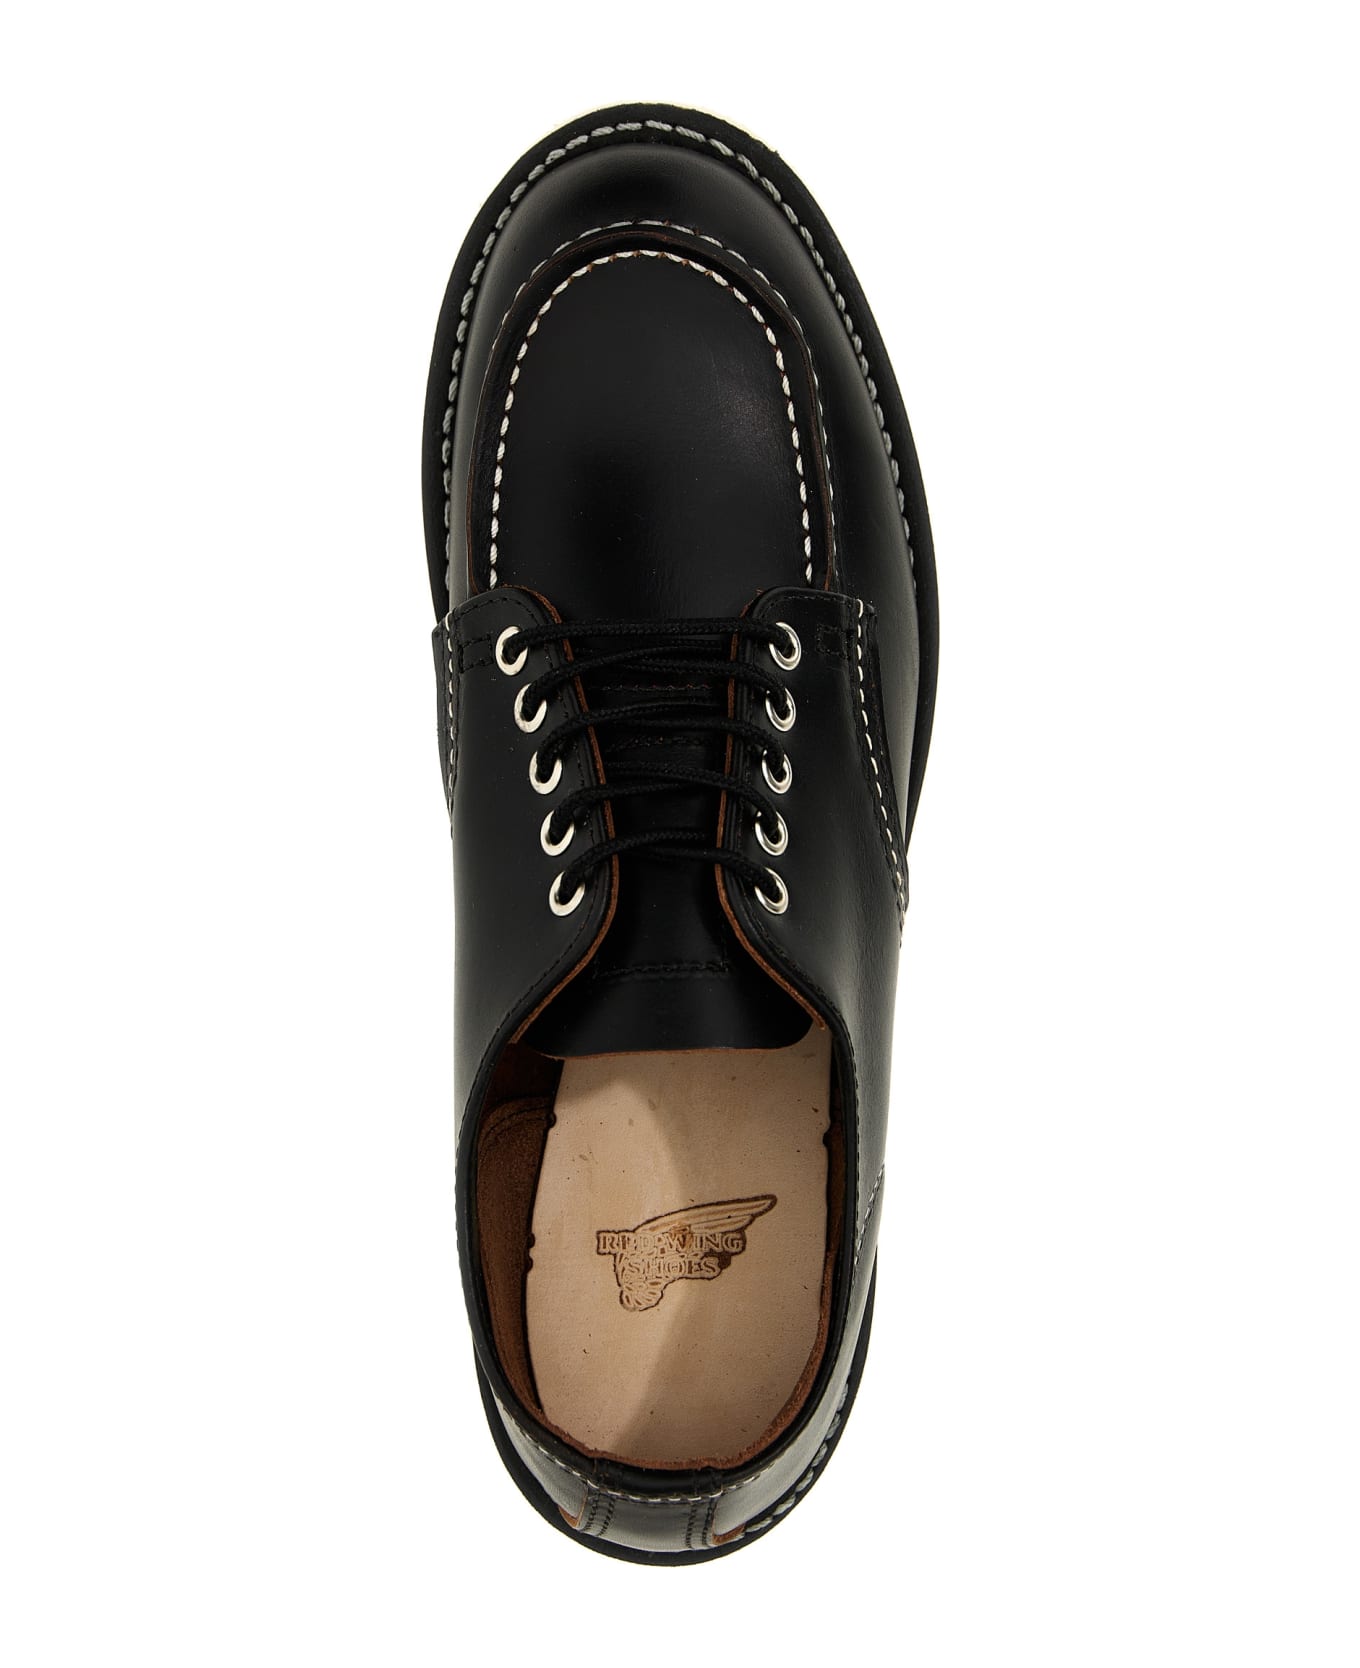 Red Wing 'shop Moc Oxford' Lace Up Shoes - Black  